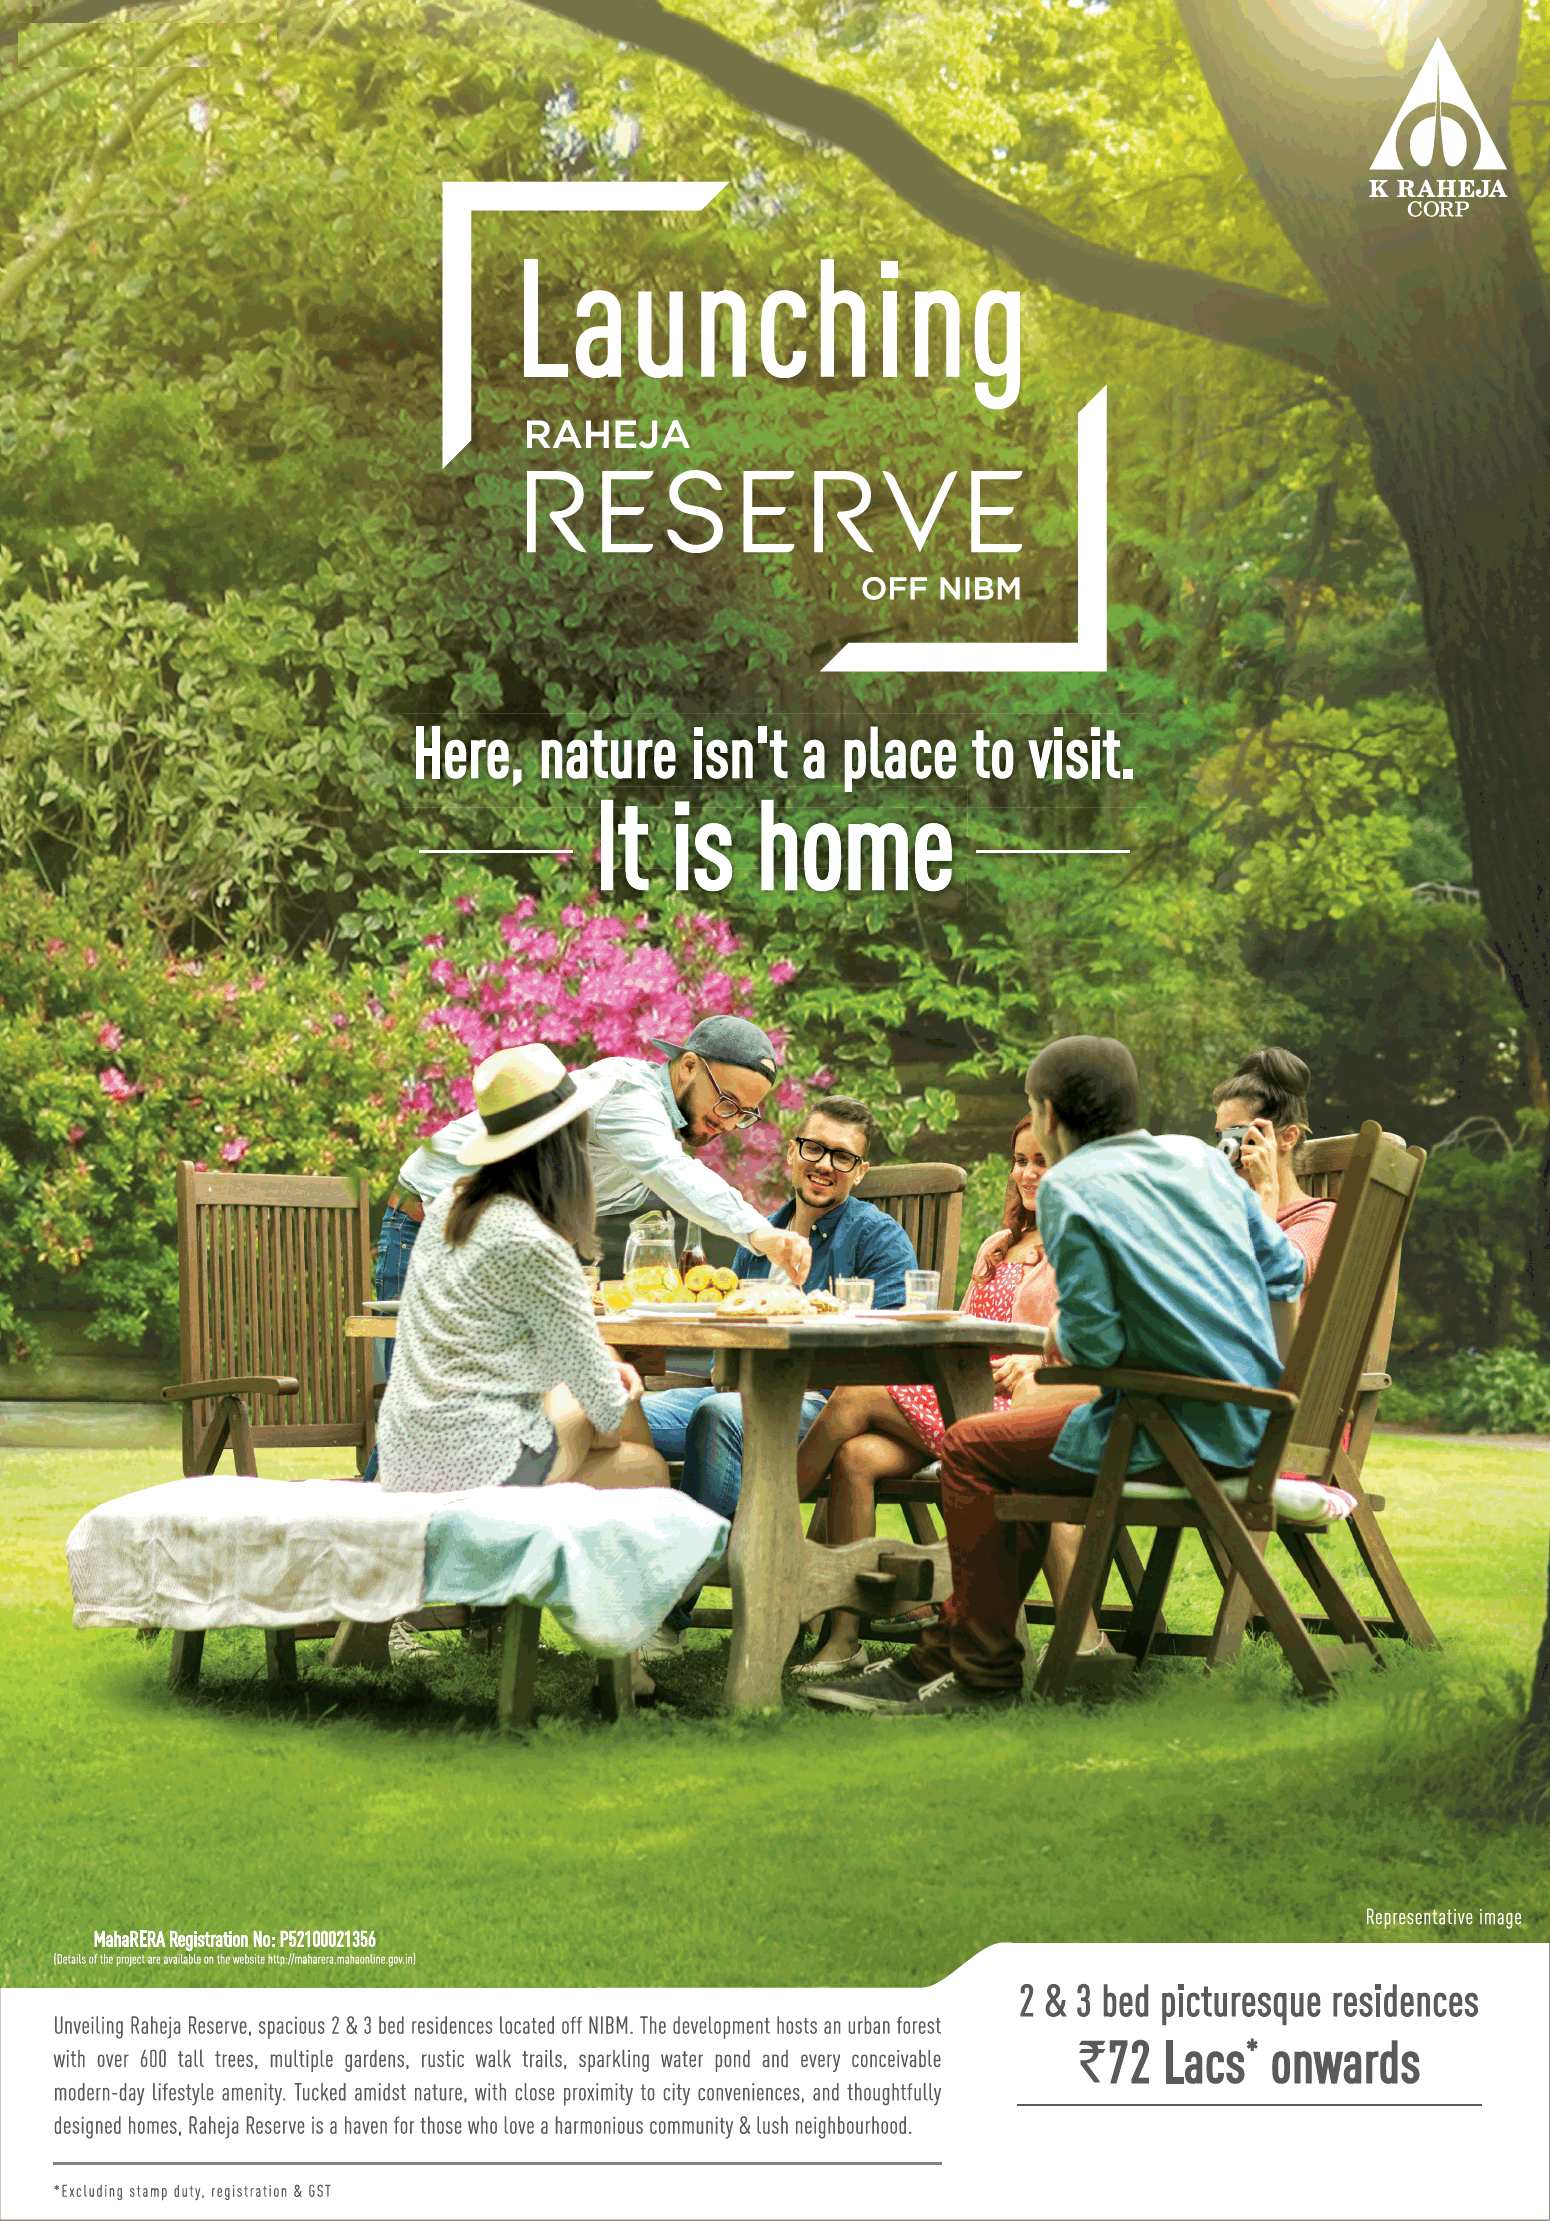 Book 2 & 3 Bed picturesque residences Rs 72 Lacs at Raheja Reserve in Pune